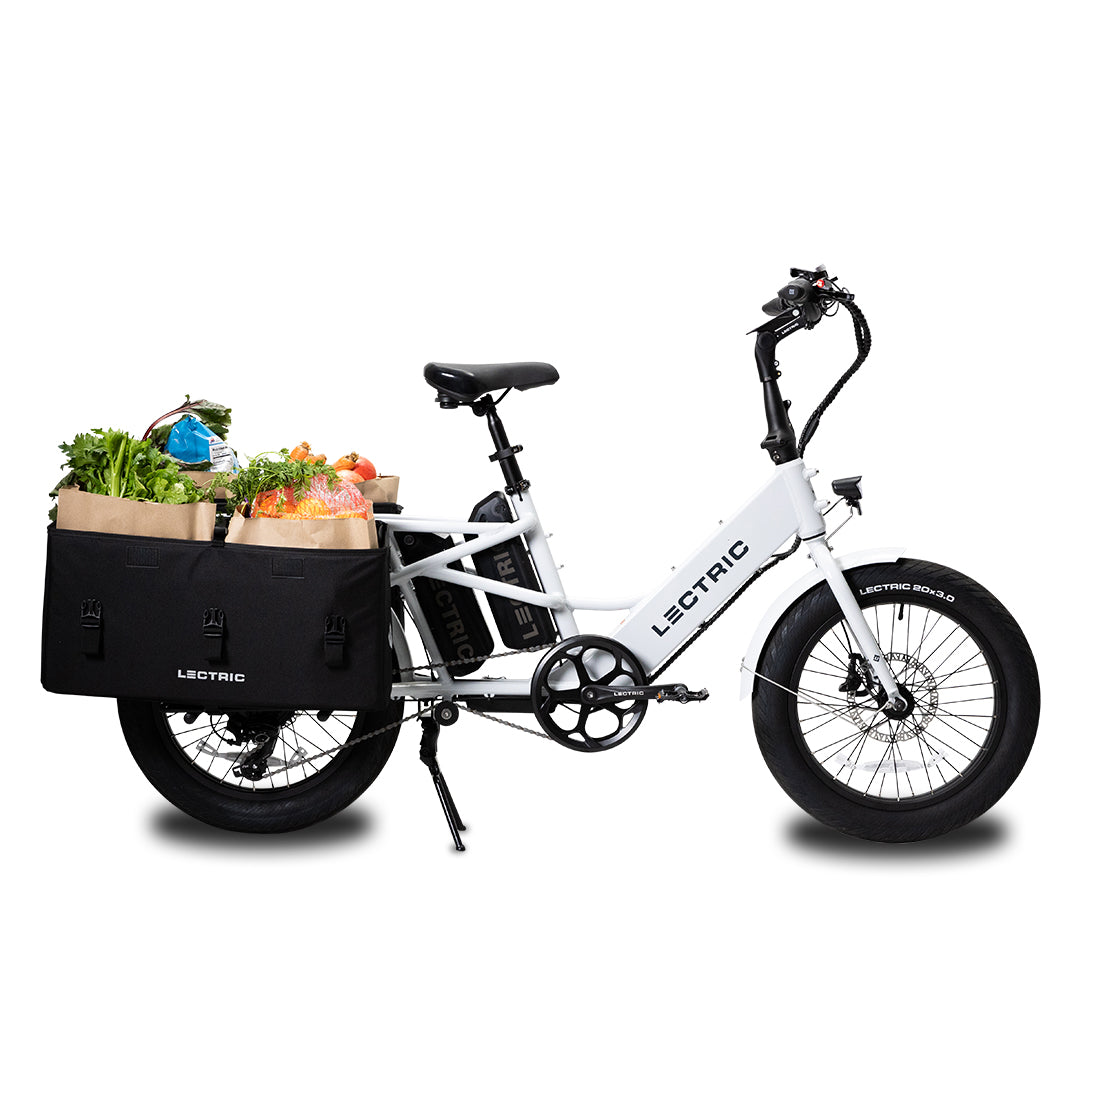 Lectric XPedition ebike with XL cargo pannier mounted with groceries